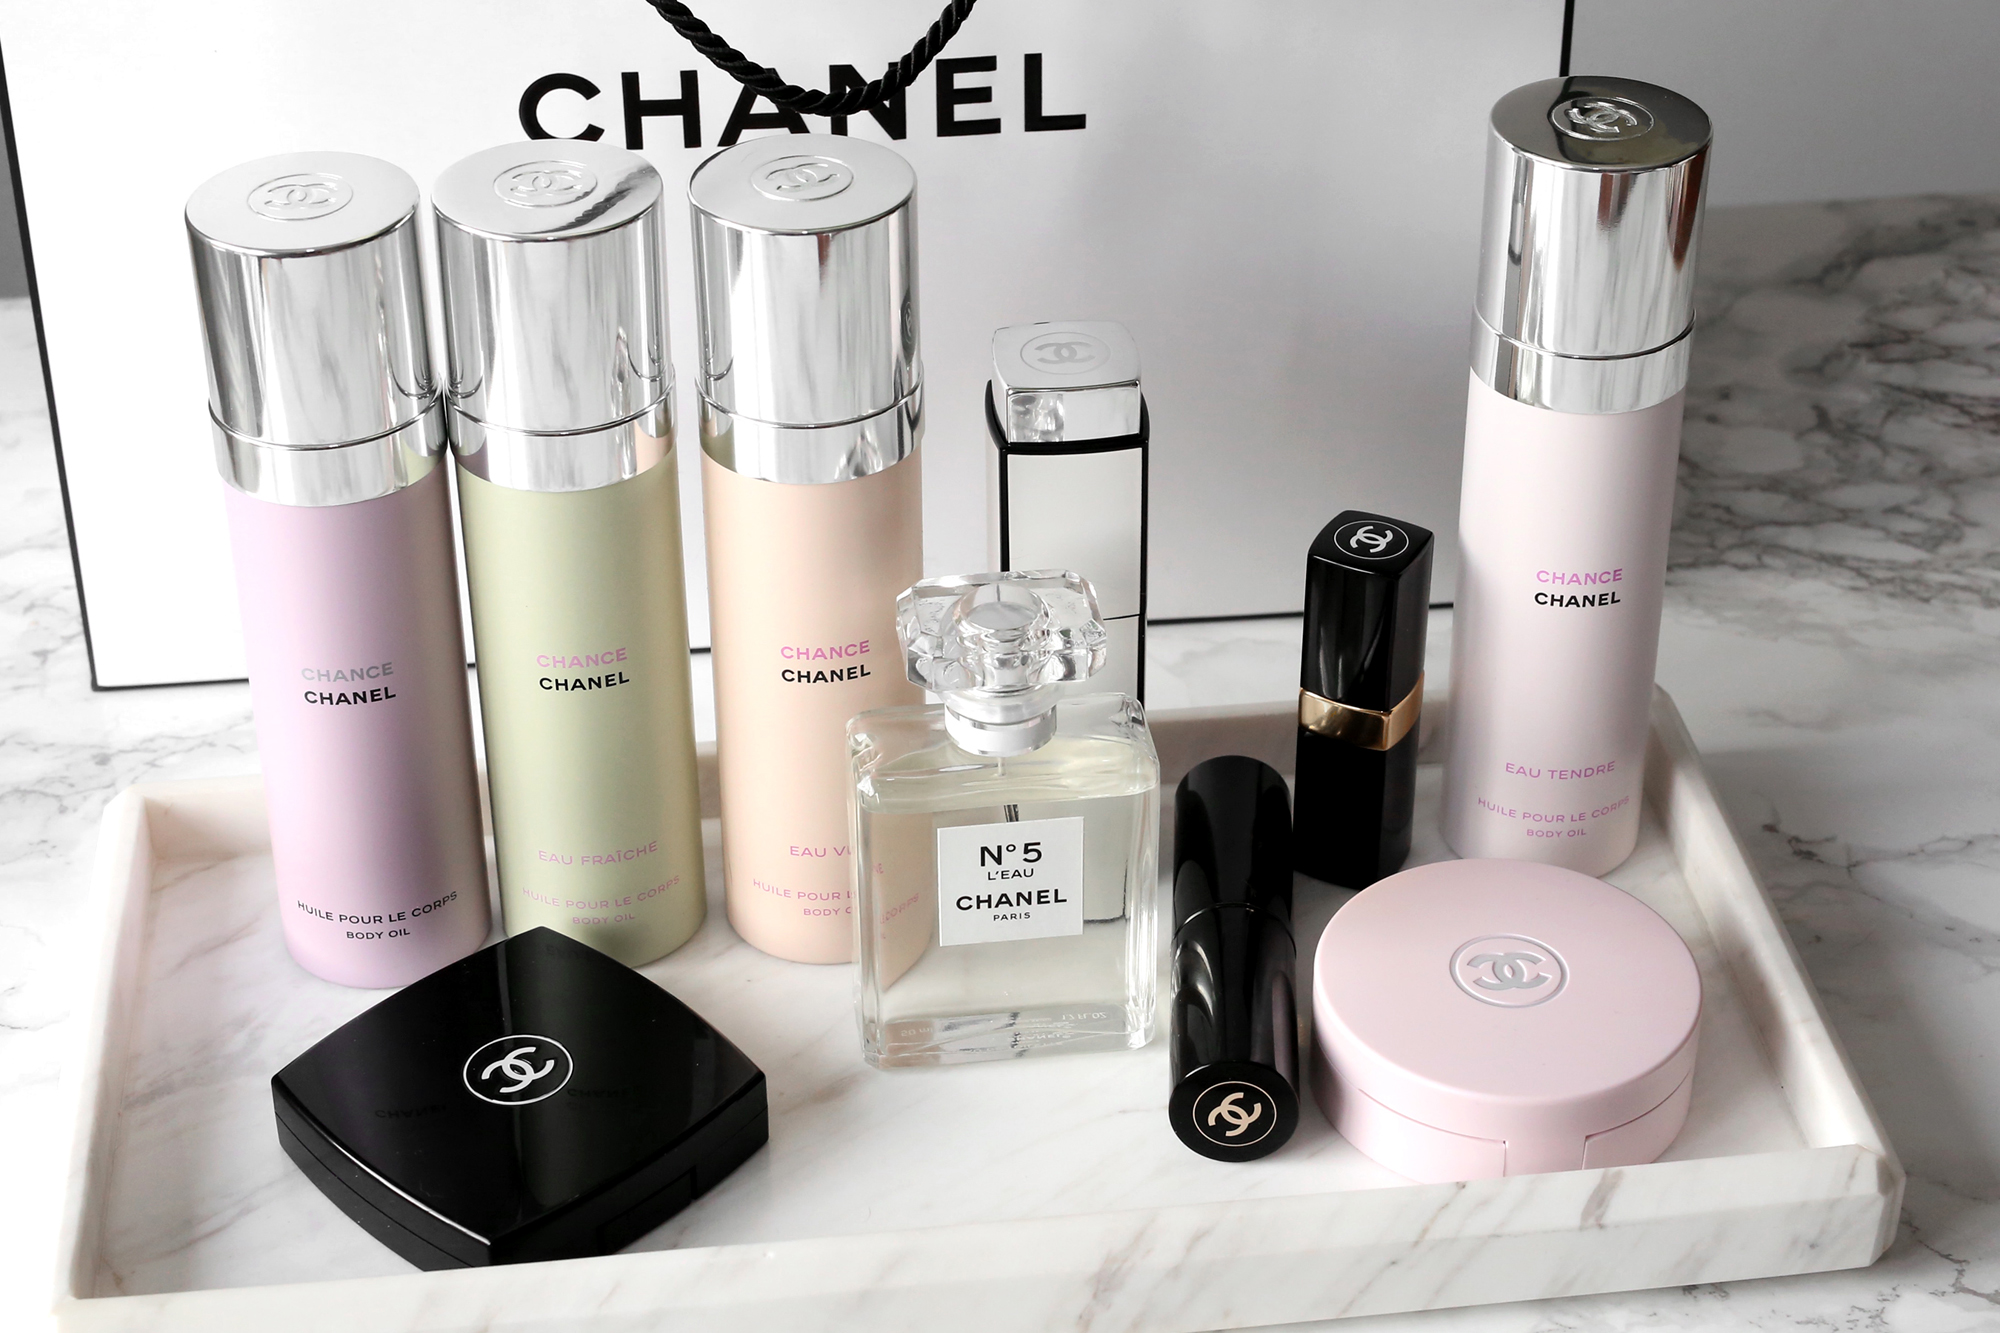 I'm getting mad compliments from CHANEL'S new Coco Mademoiselle 